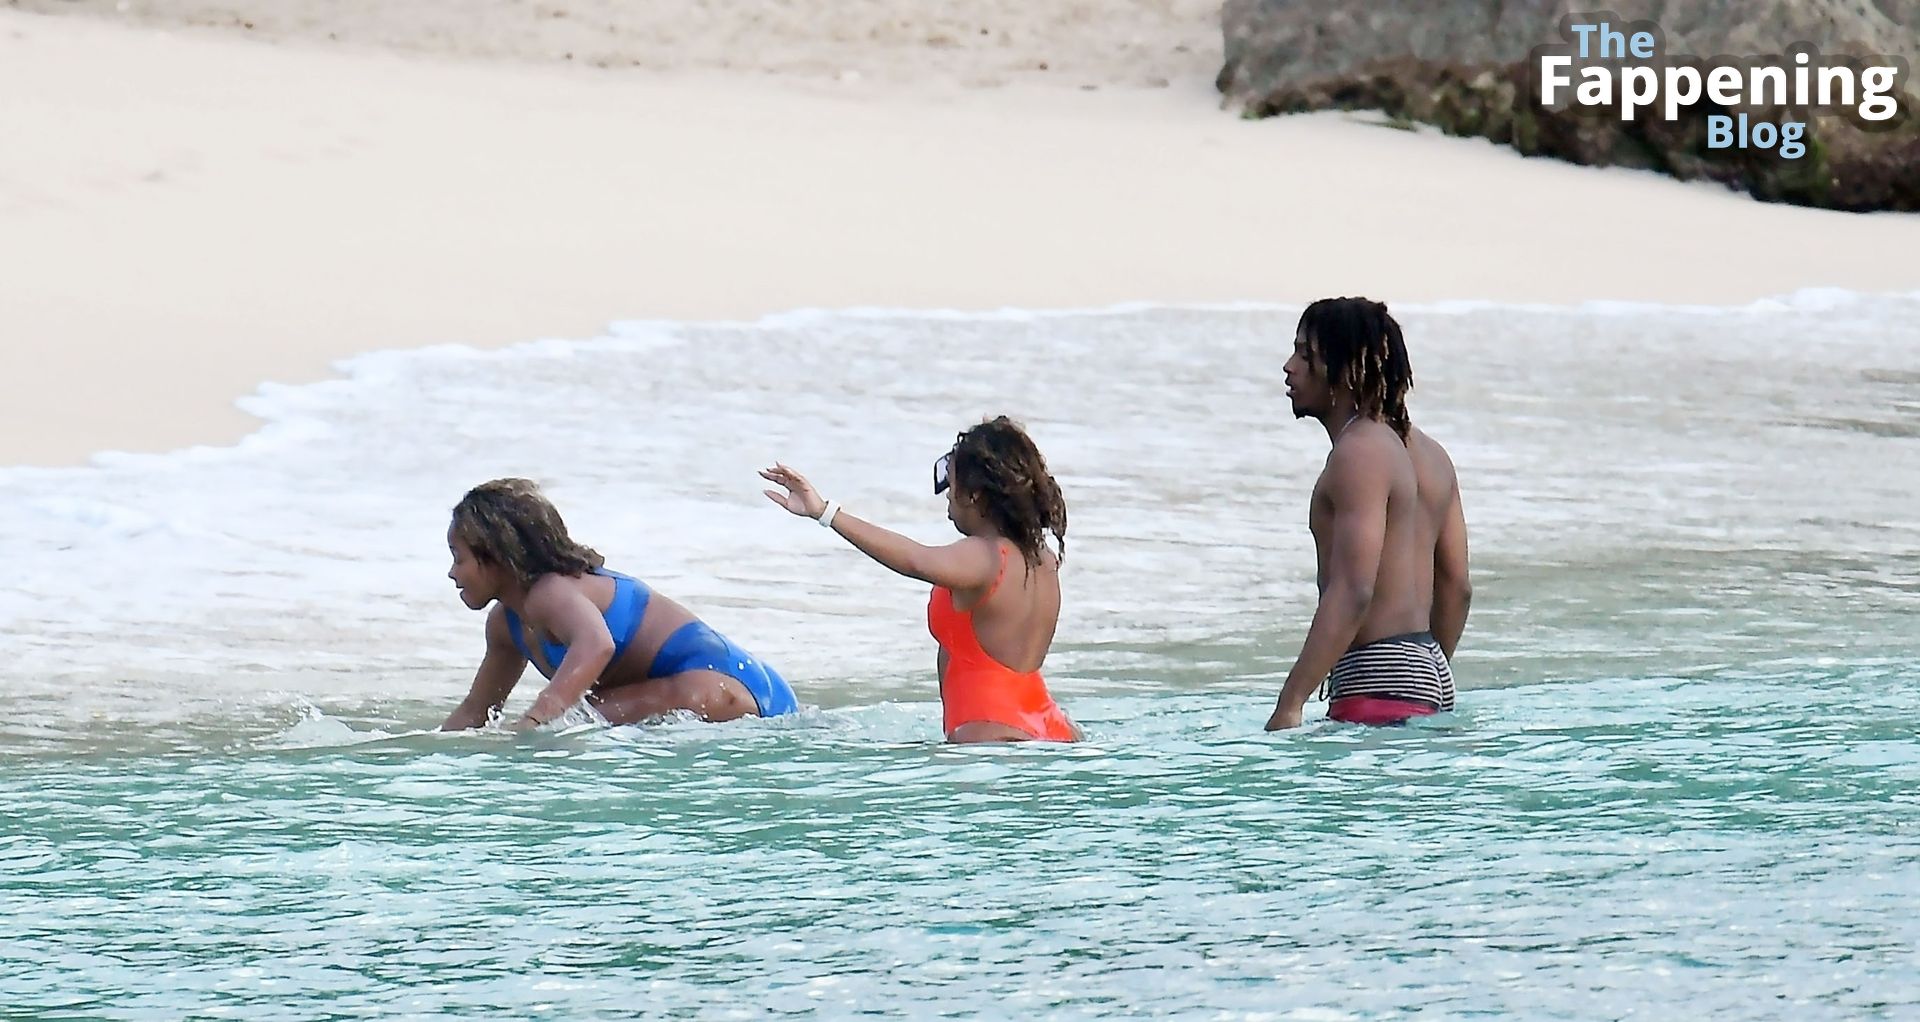 Fleur East is Pictured Having Fun on New Year’s Day with Friends While on Holiday in Barbados (63 Photos)